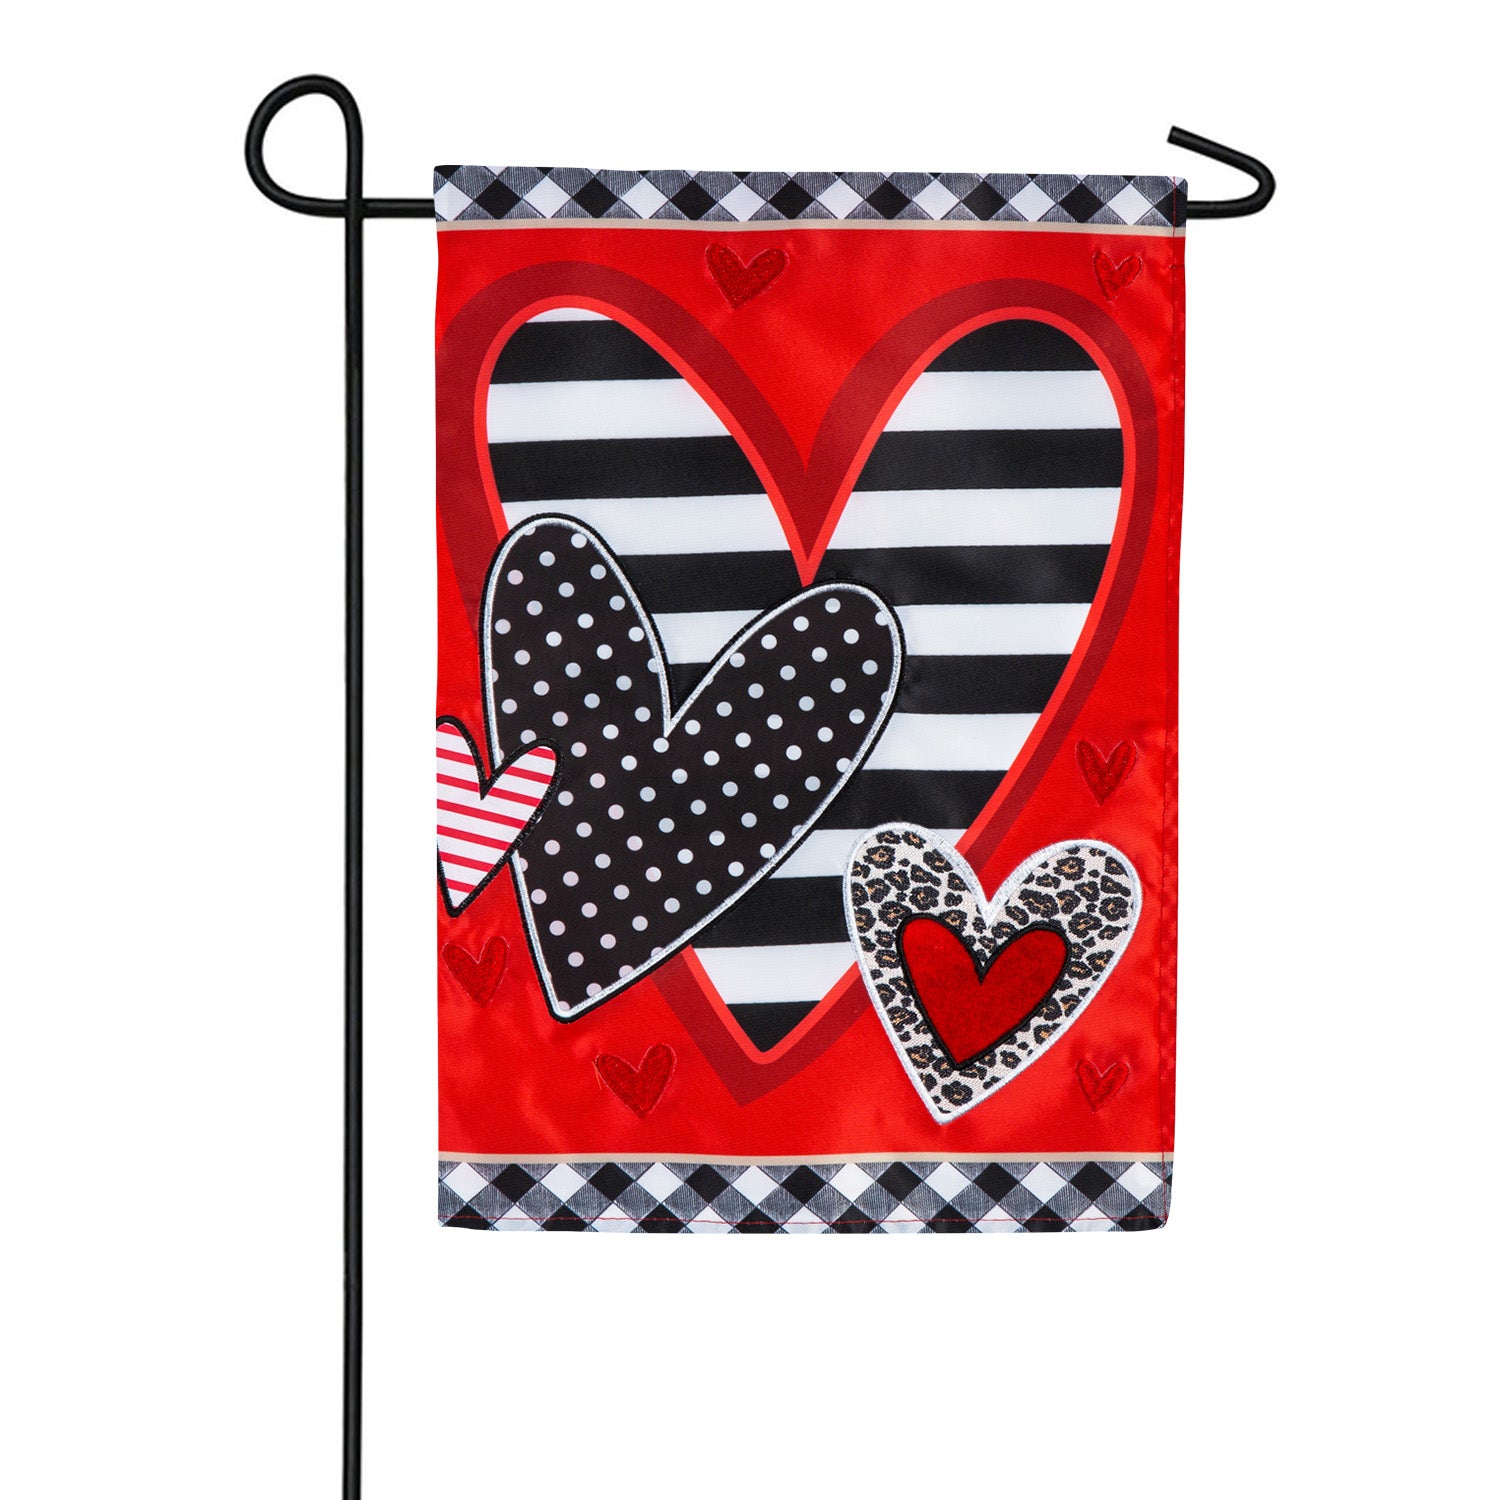 Evergreen Patterned Hearts Double Appliqued Garden Flag